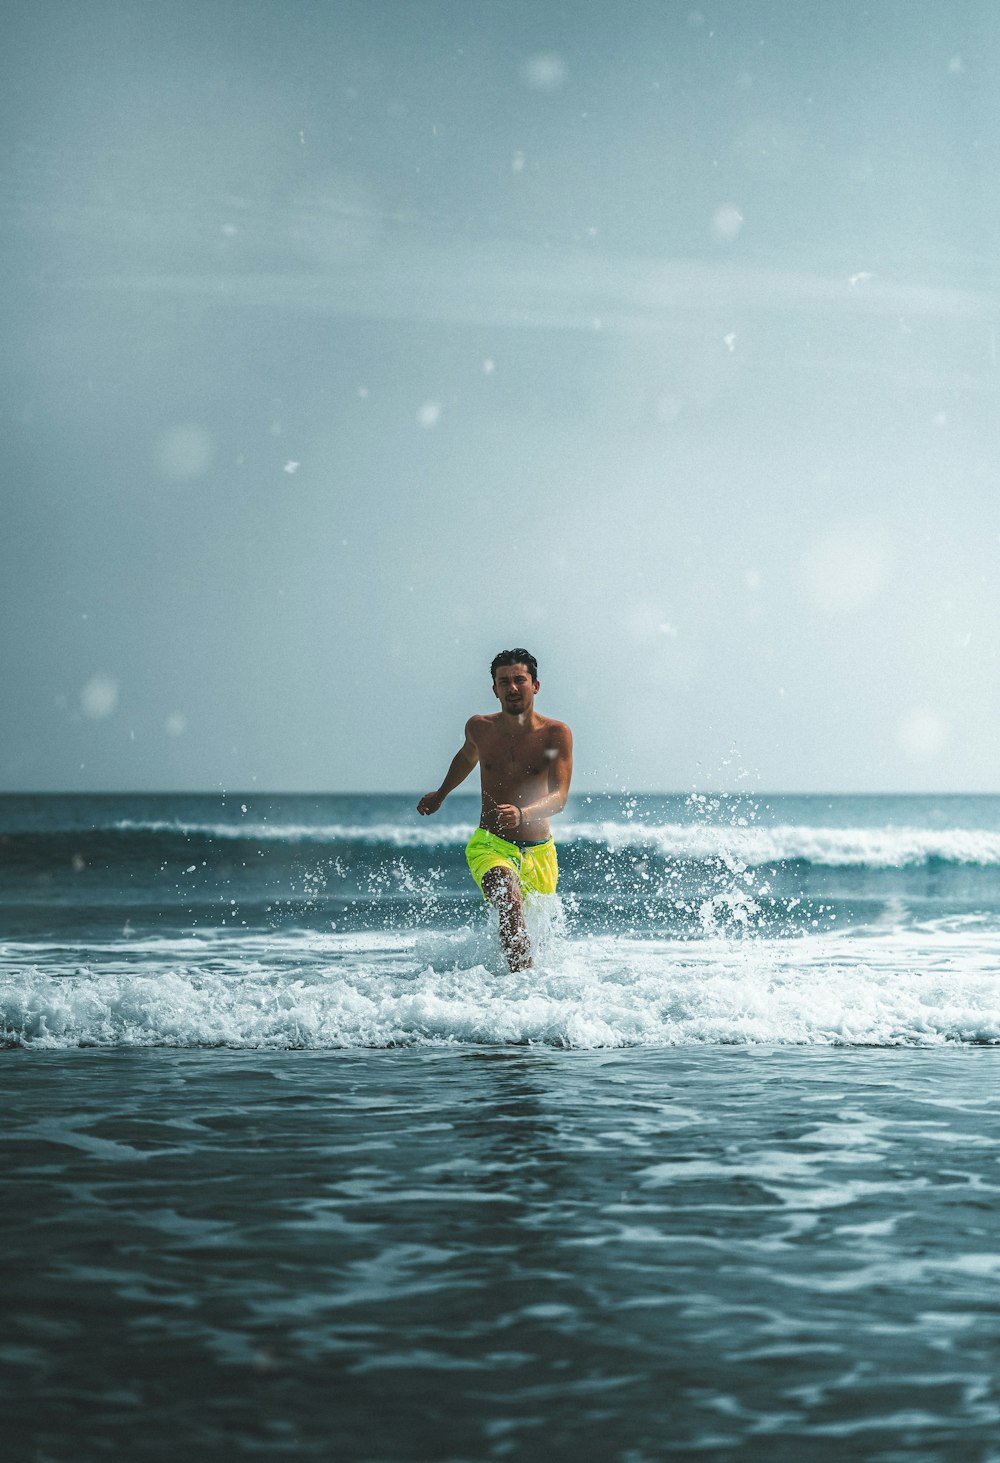 man in yellow shorts surfing on sea waves during daytime